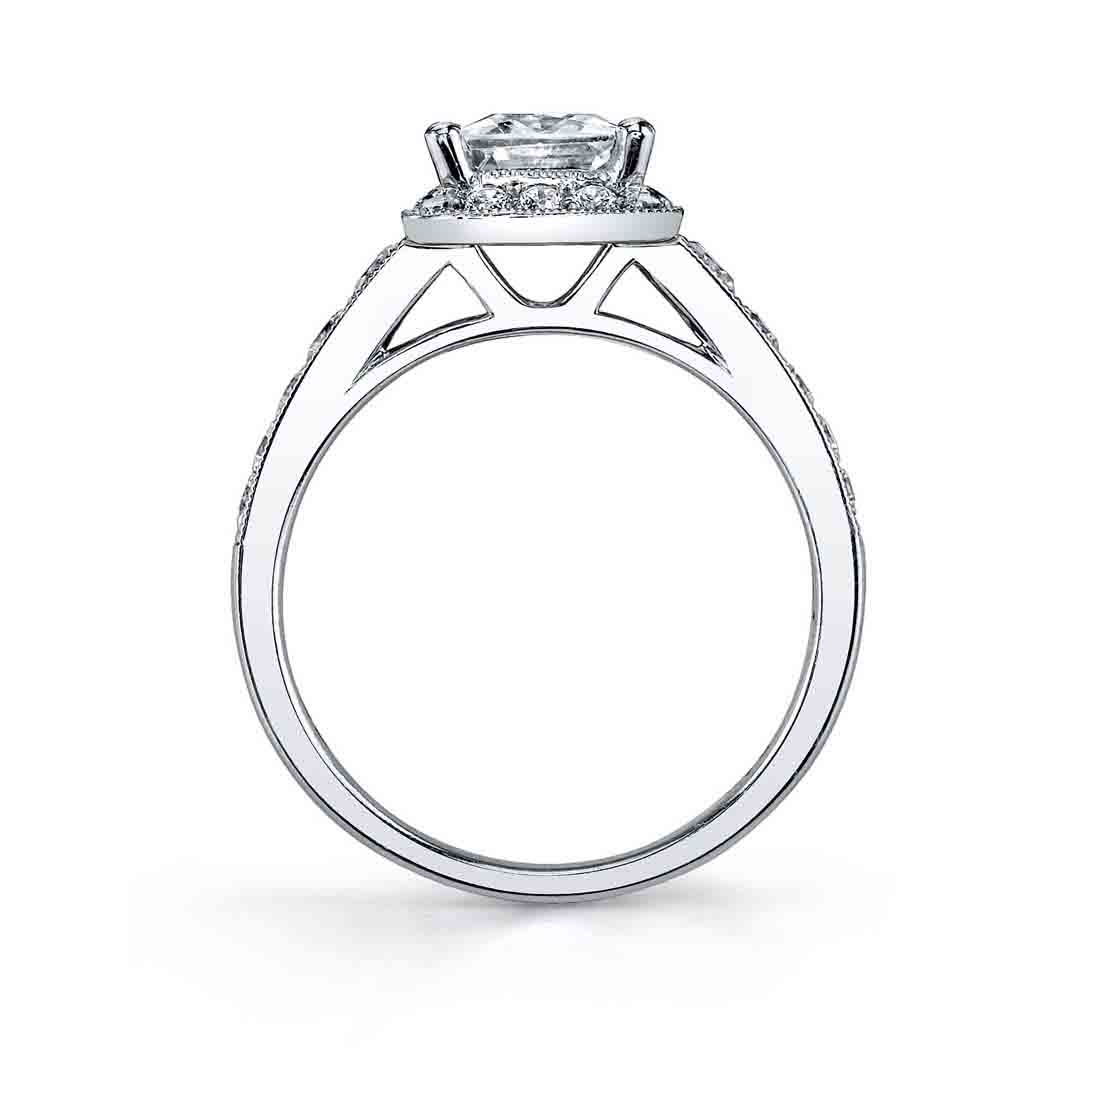 Profile Image of a Vintage Inspired Halo Engagement Ring